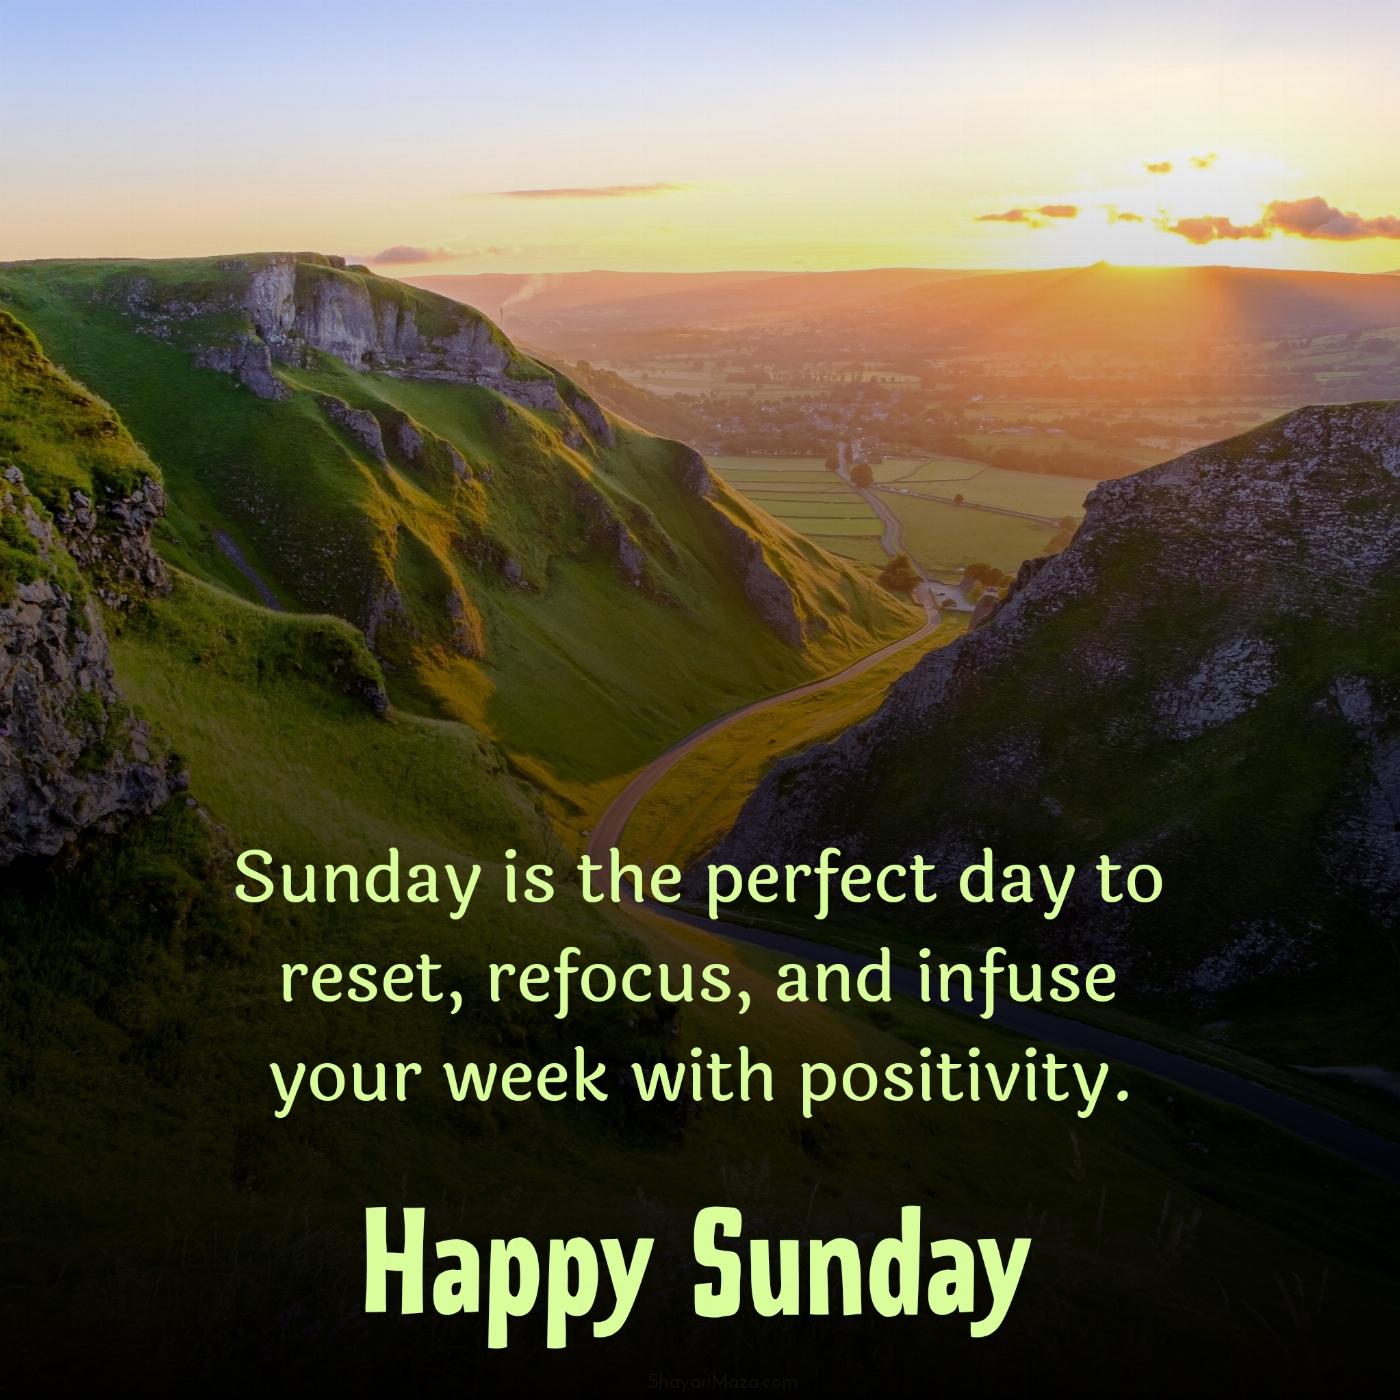 Sunday is the perfect day to reset refocus and infuse your week